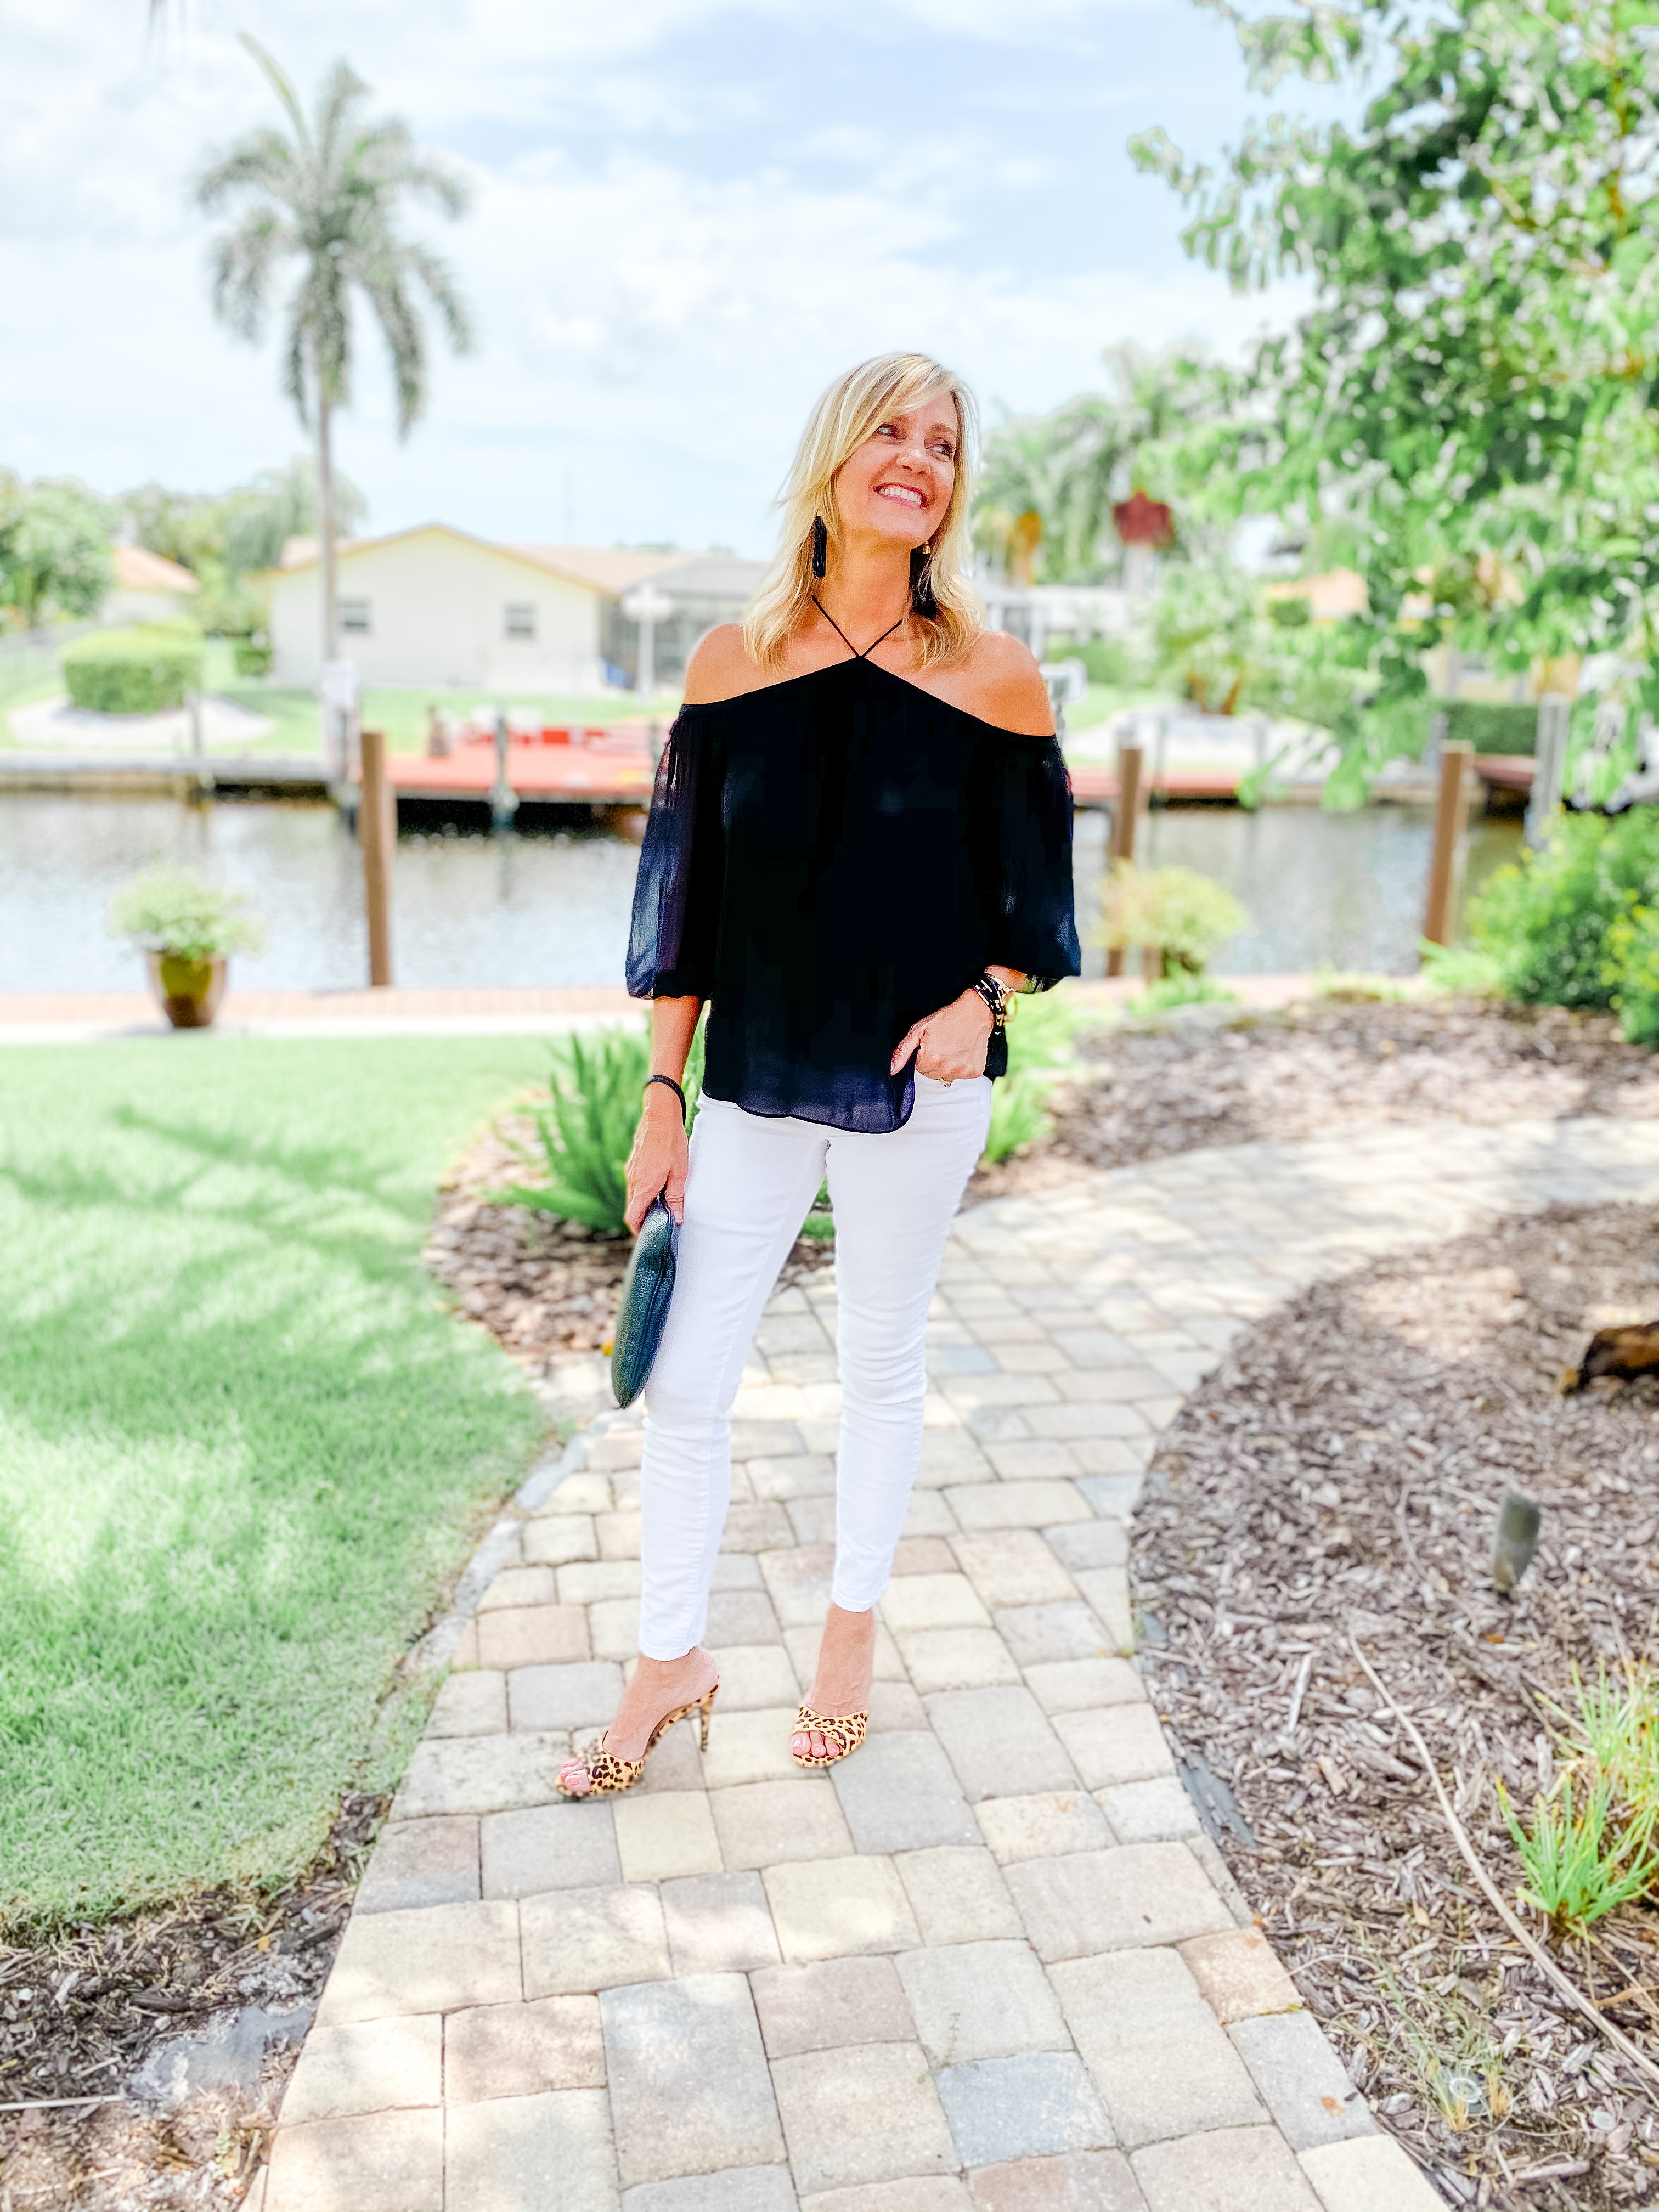 White Jeans For Date Night! 5 outfit ideas for women over 50.